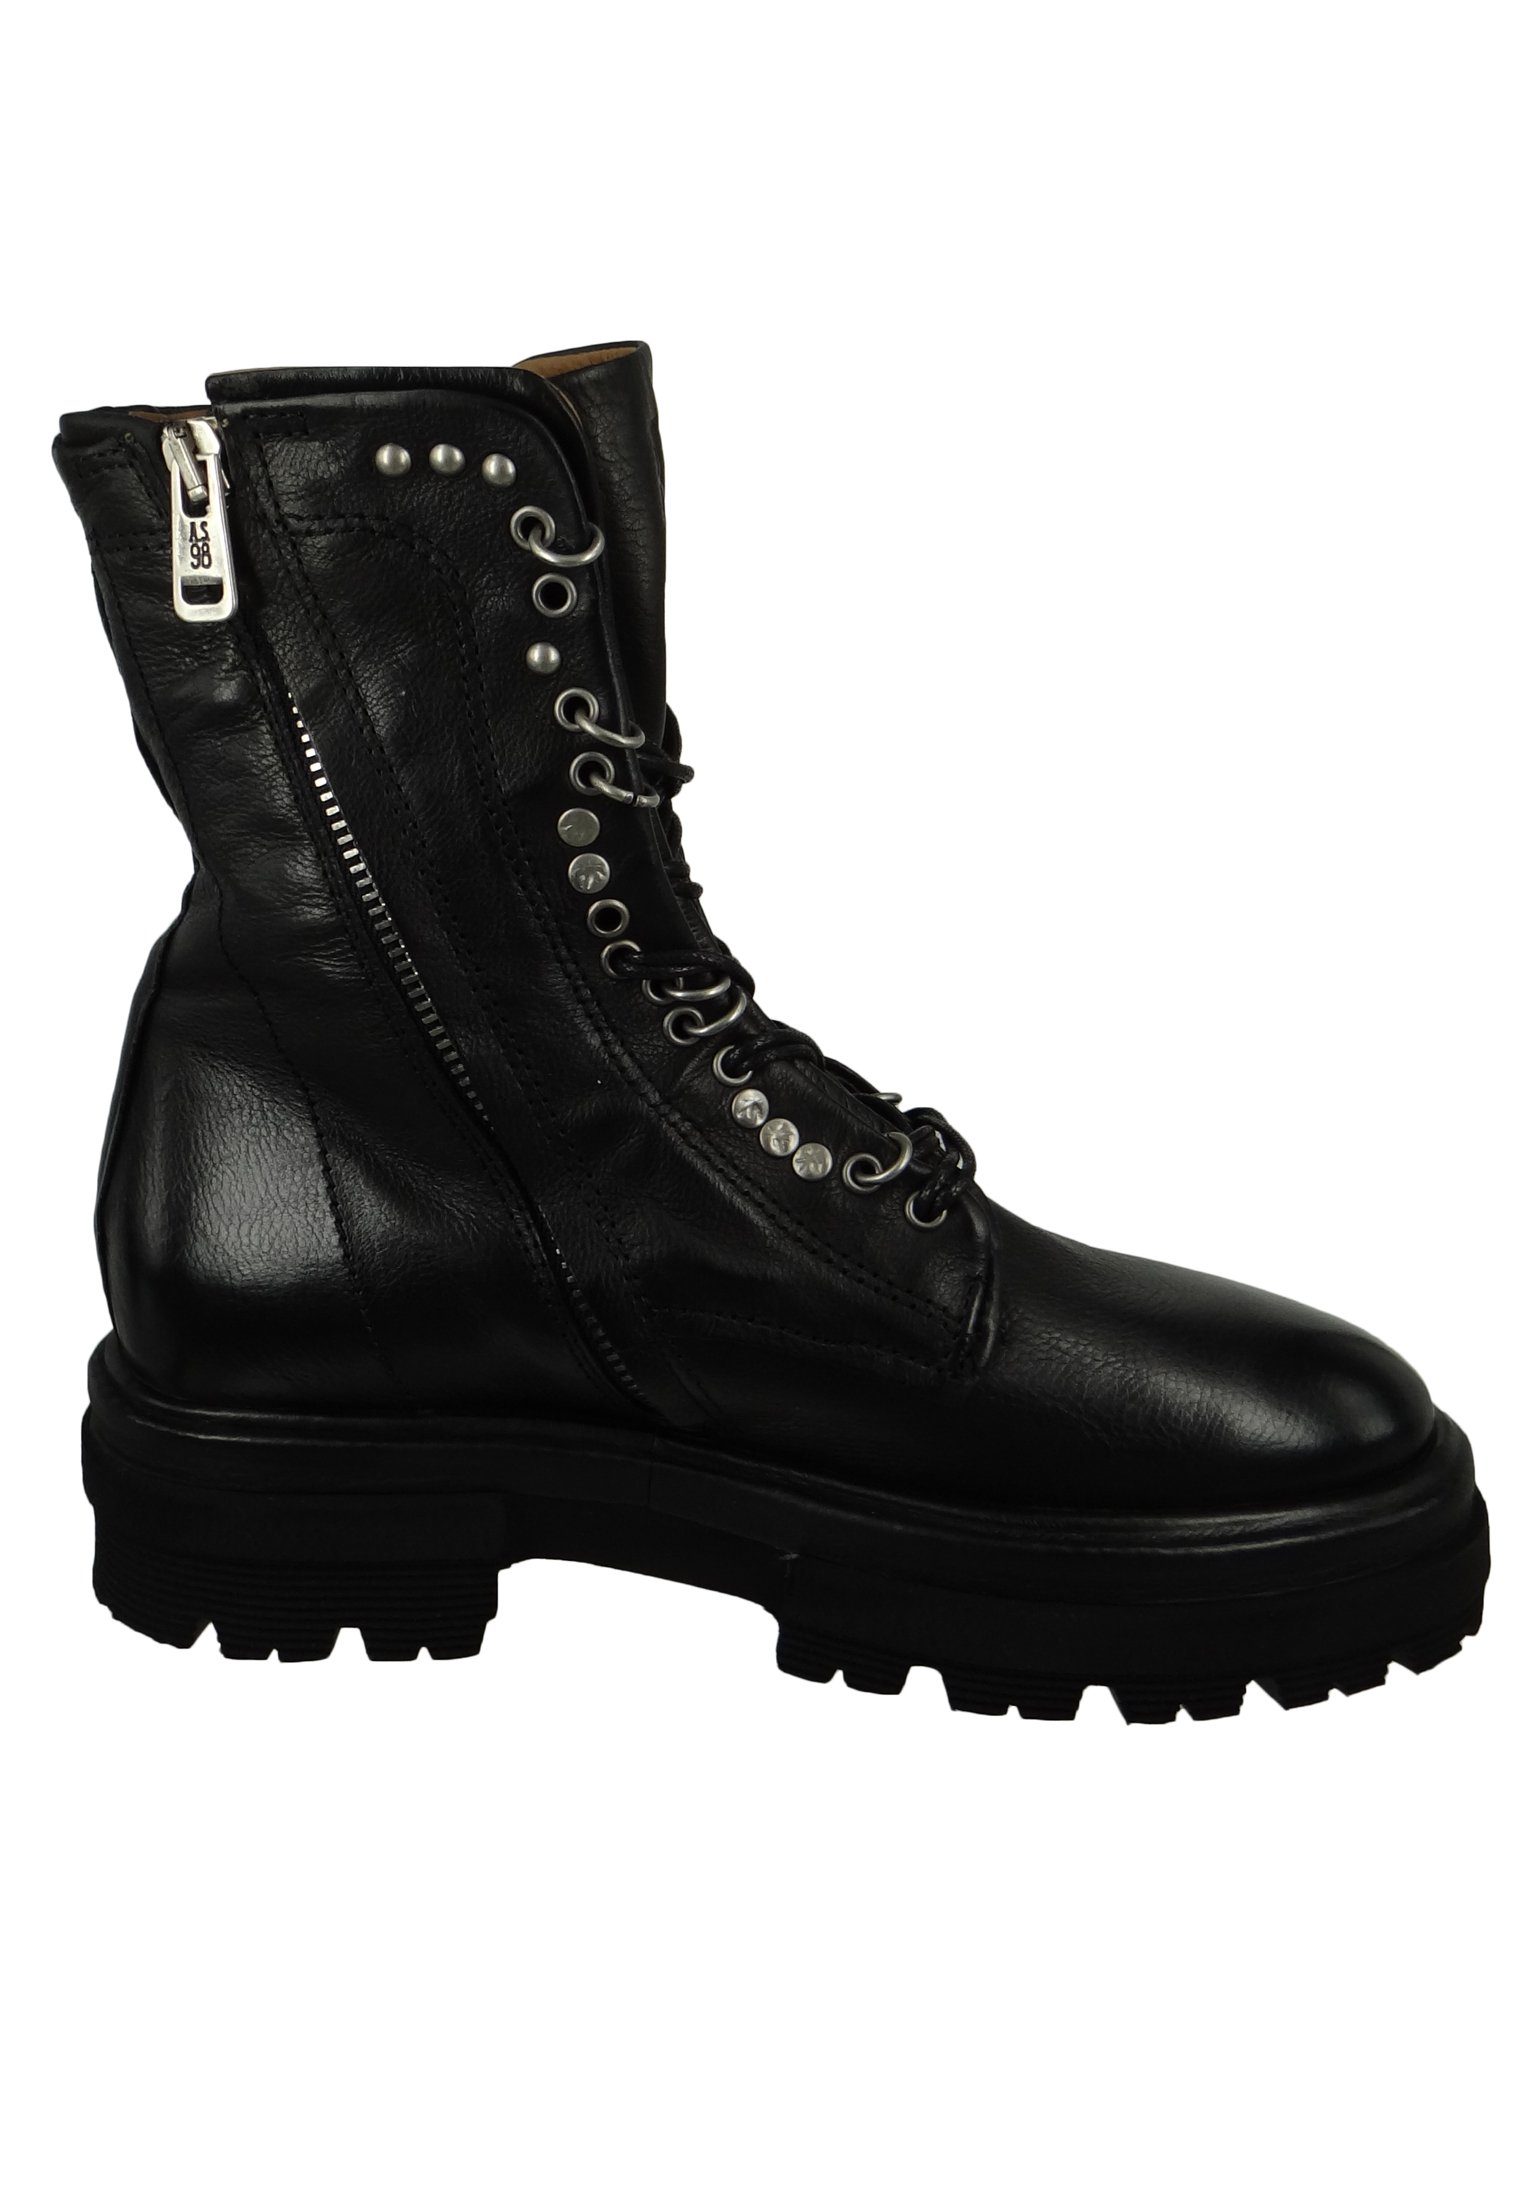 A59210-101-6002 A.S.98 Stiefelette Nero Hell